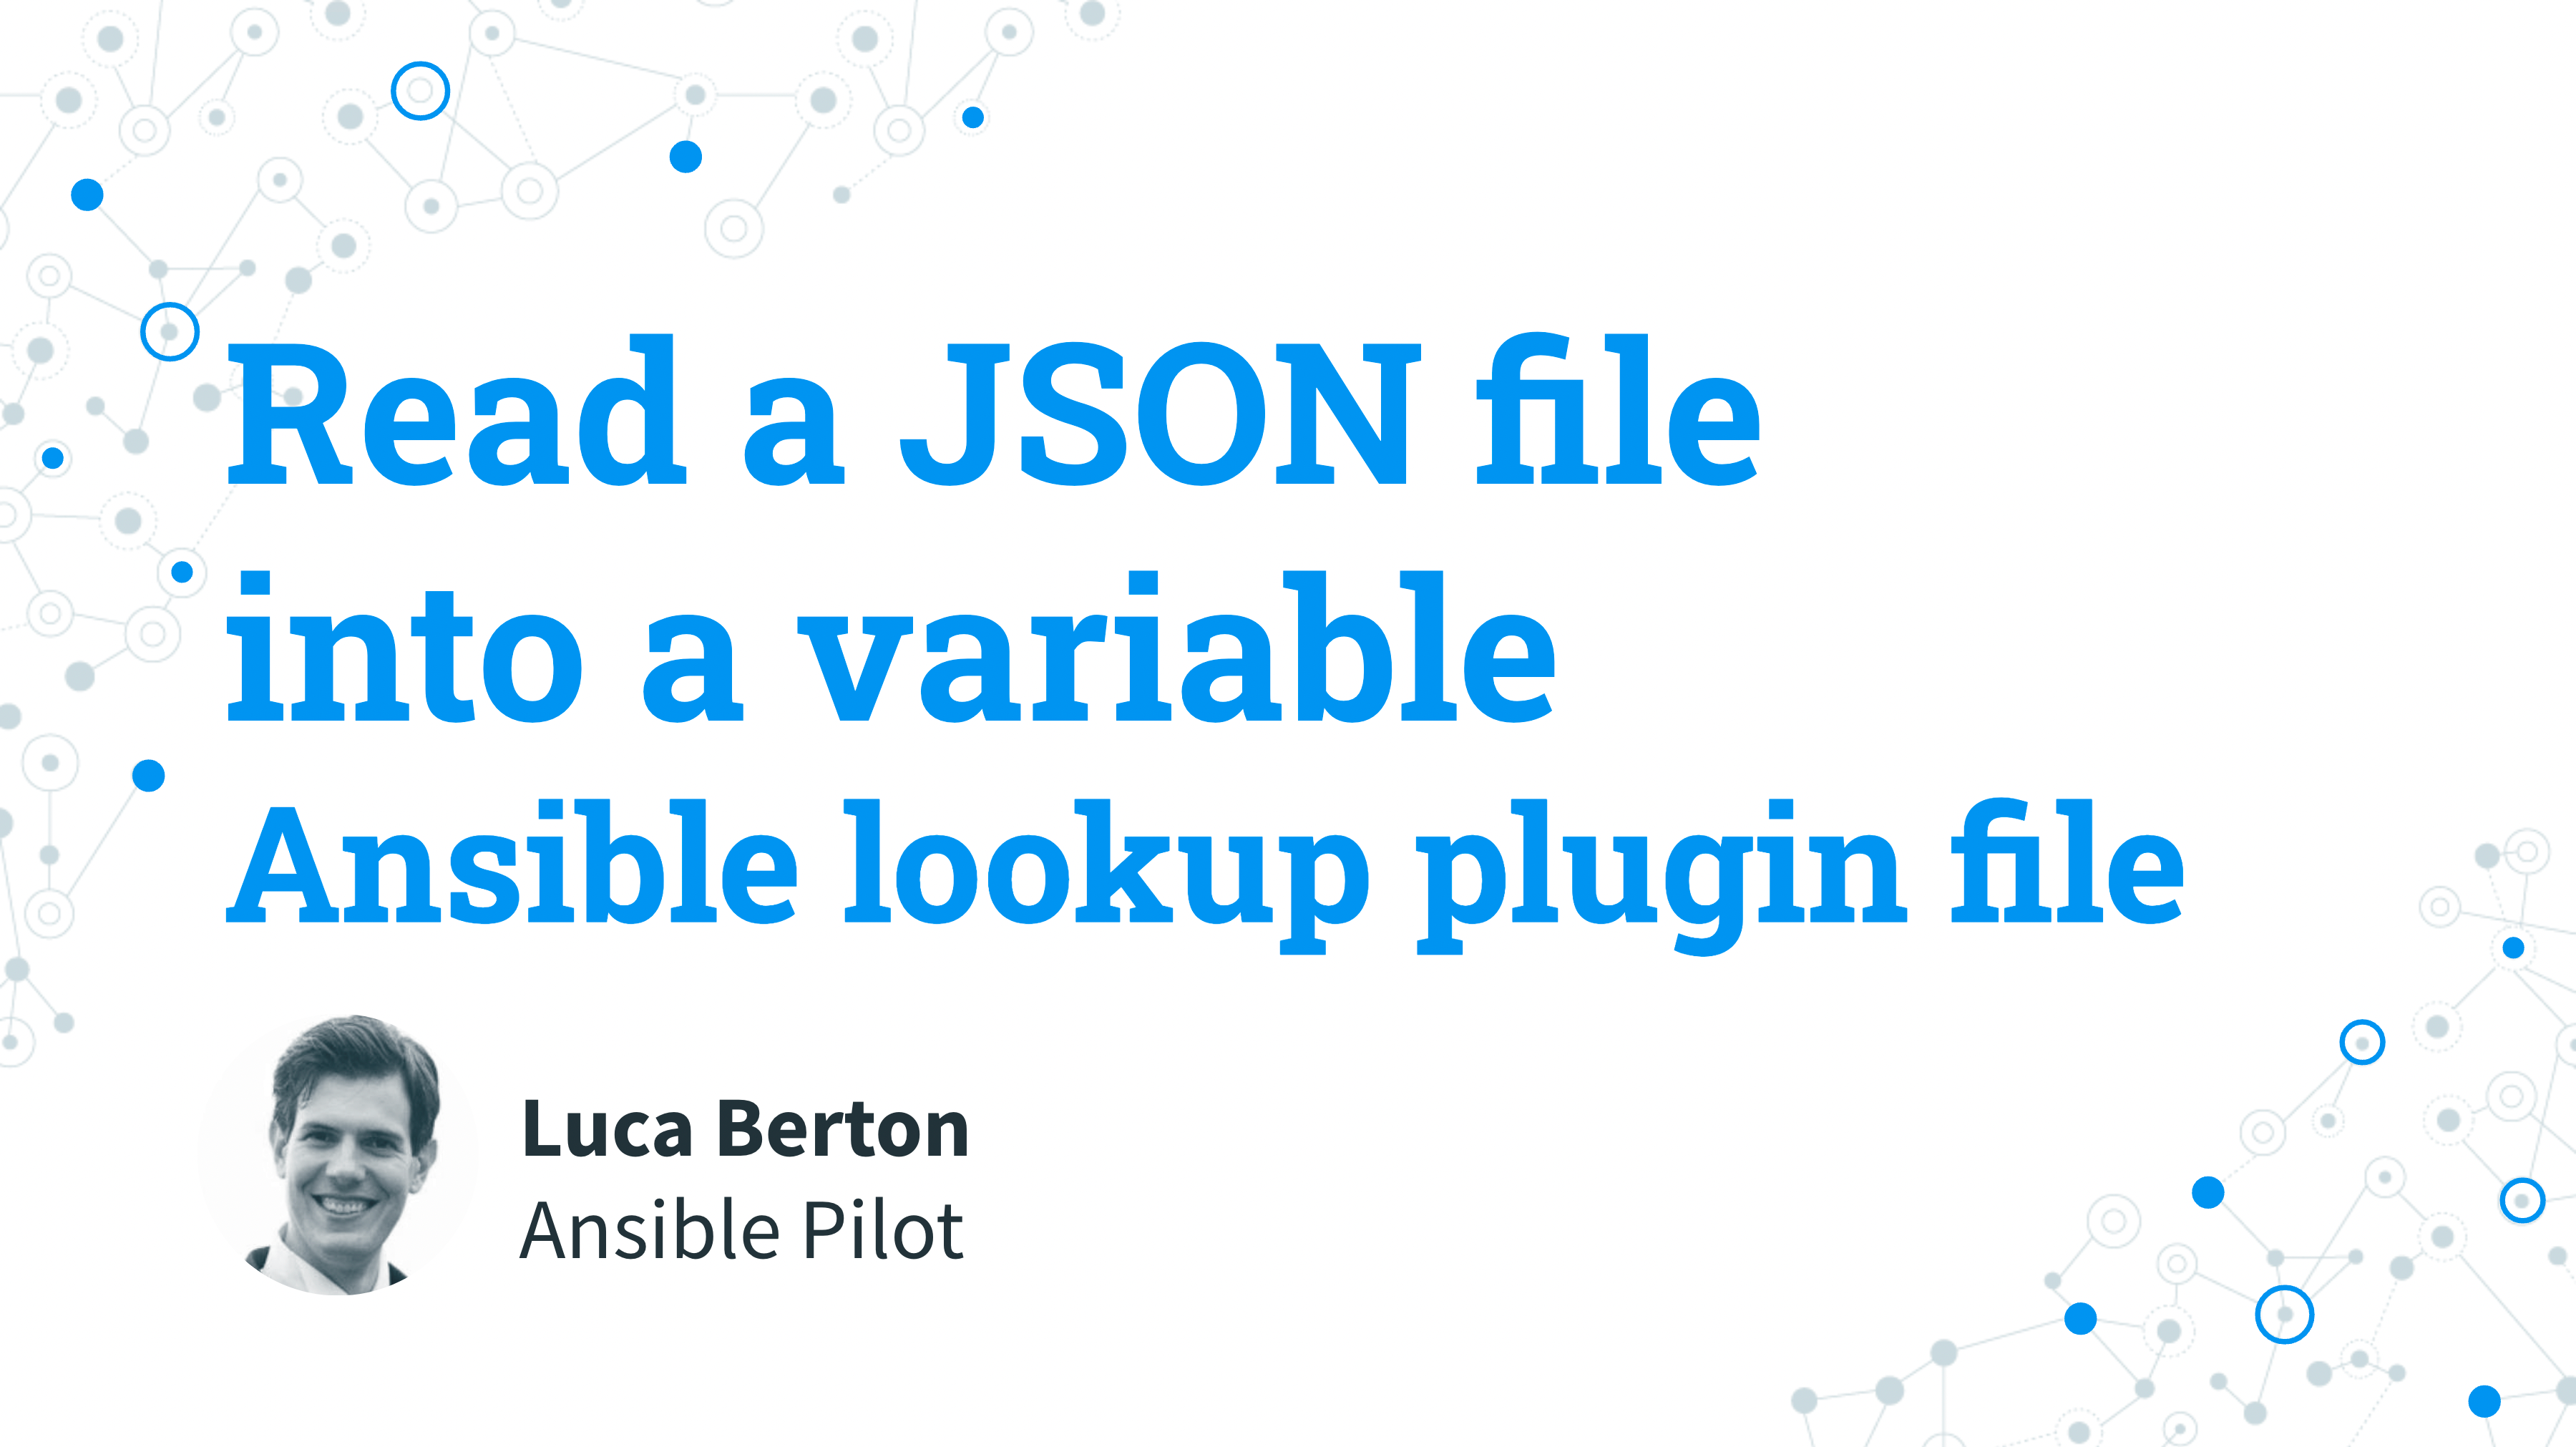 Read a JSON file into a variable - Ansible lookup plugin file